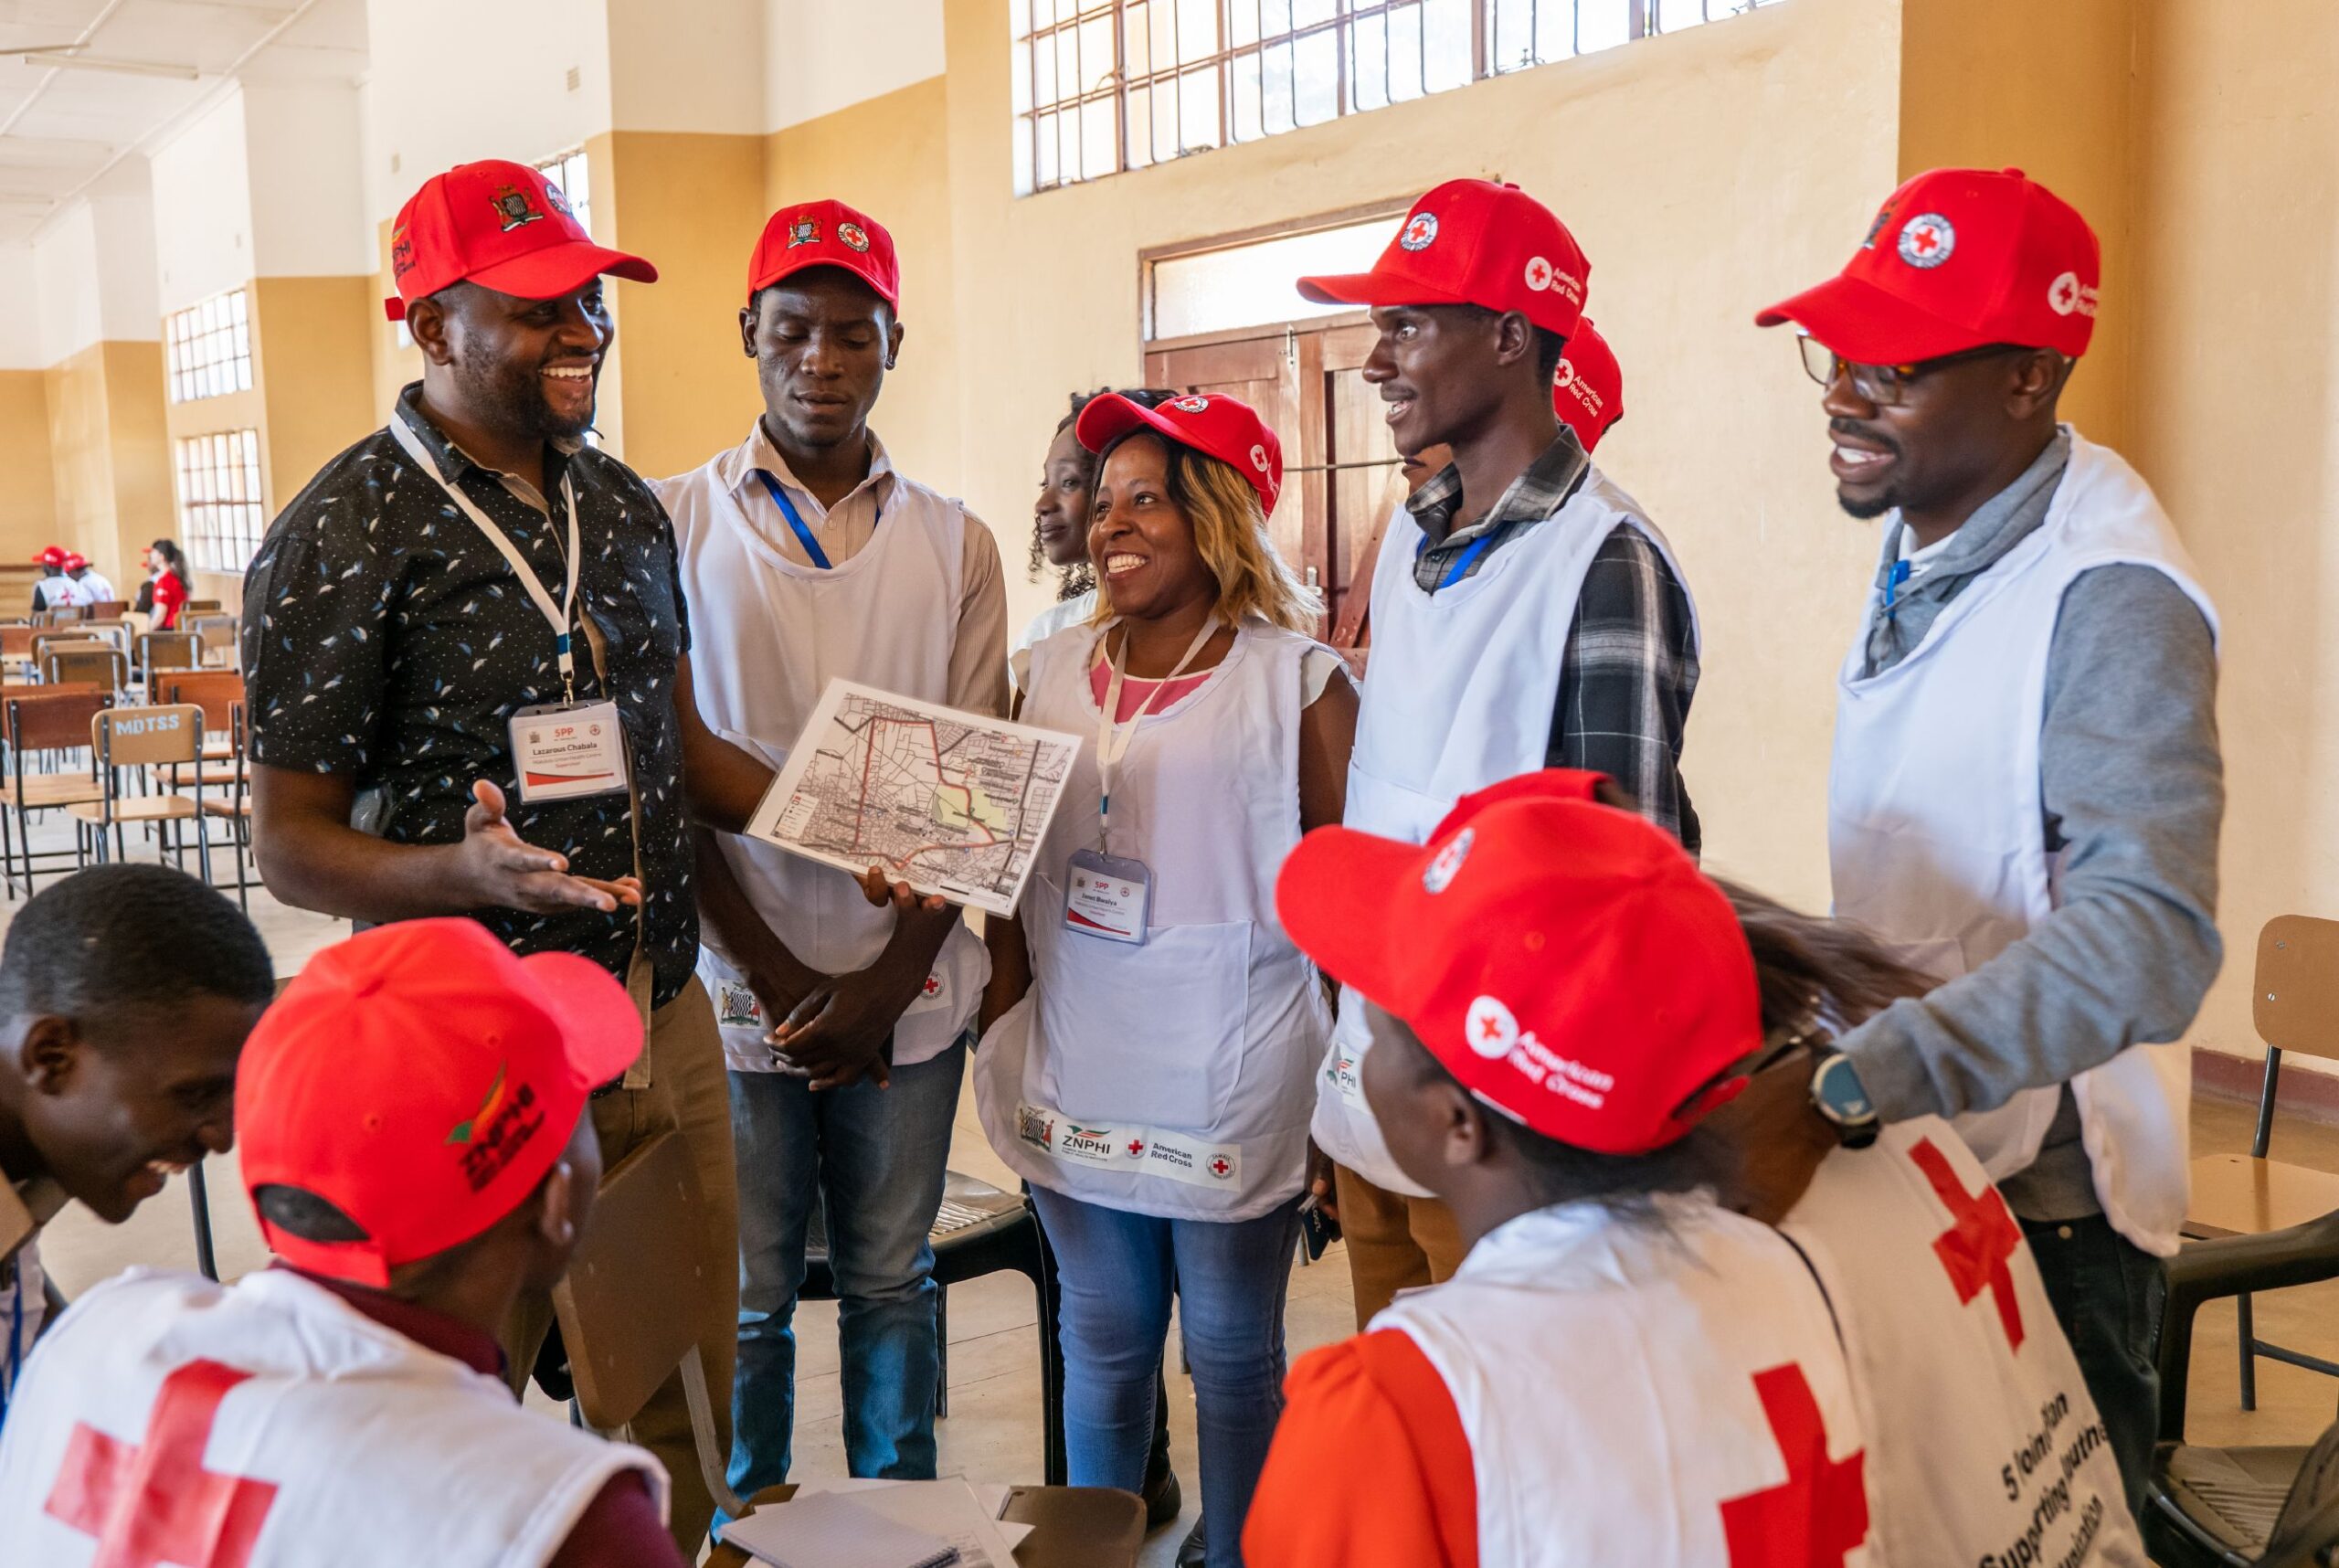 Volunteers in Kabwe, Zambia review community maps in preparation for gathering data on child vaccination rates. Photo by Brad Zerivitz/American Red Cross. 